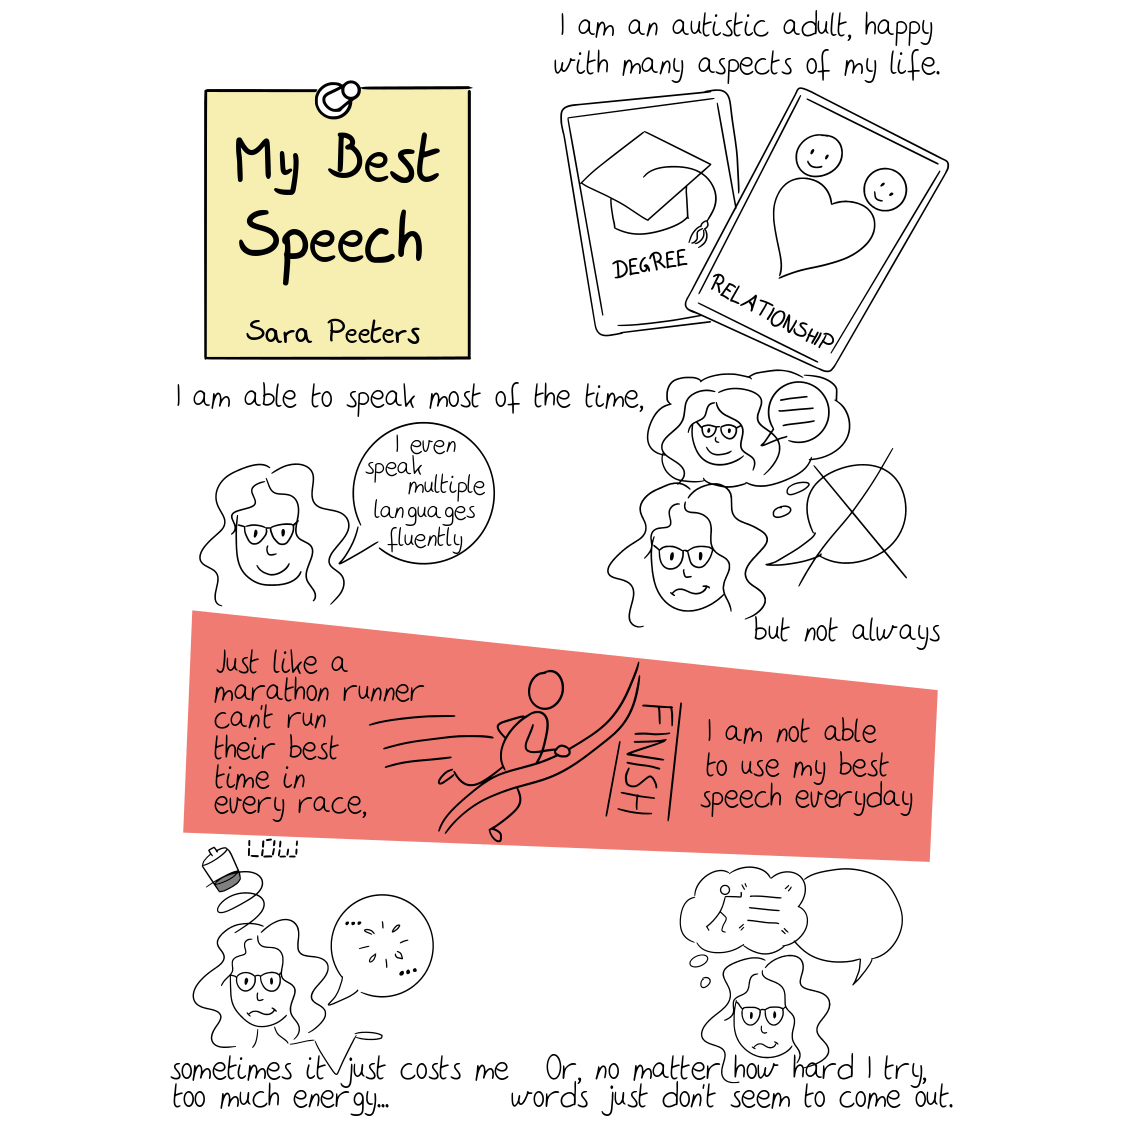 Sketchnote of My Best Speech: Comic about not being able to speak